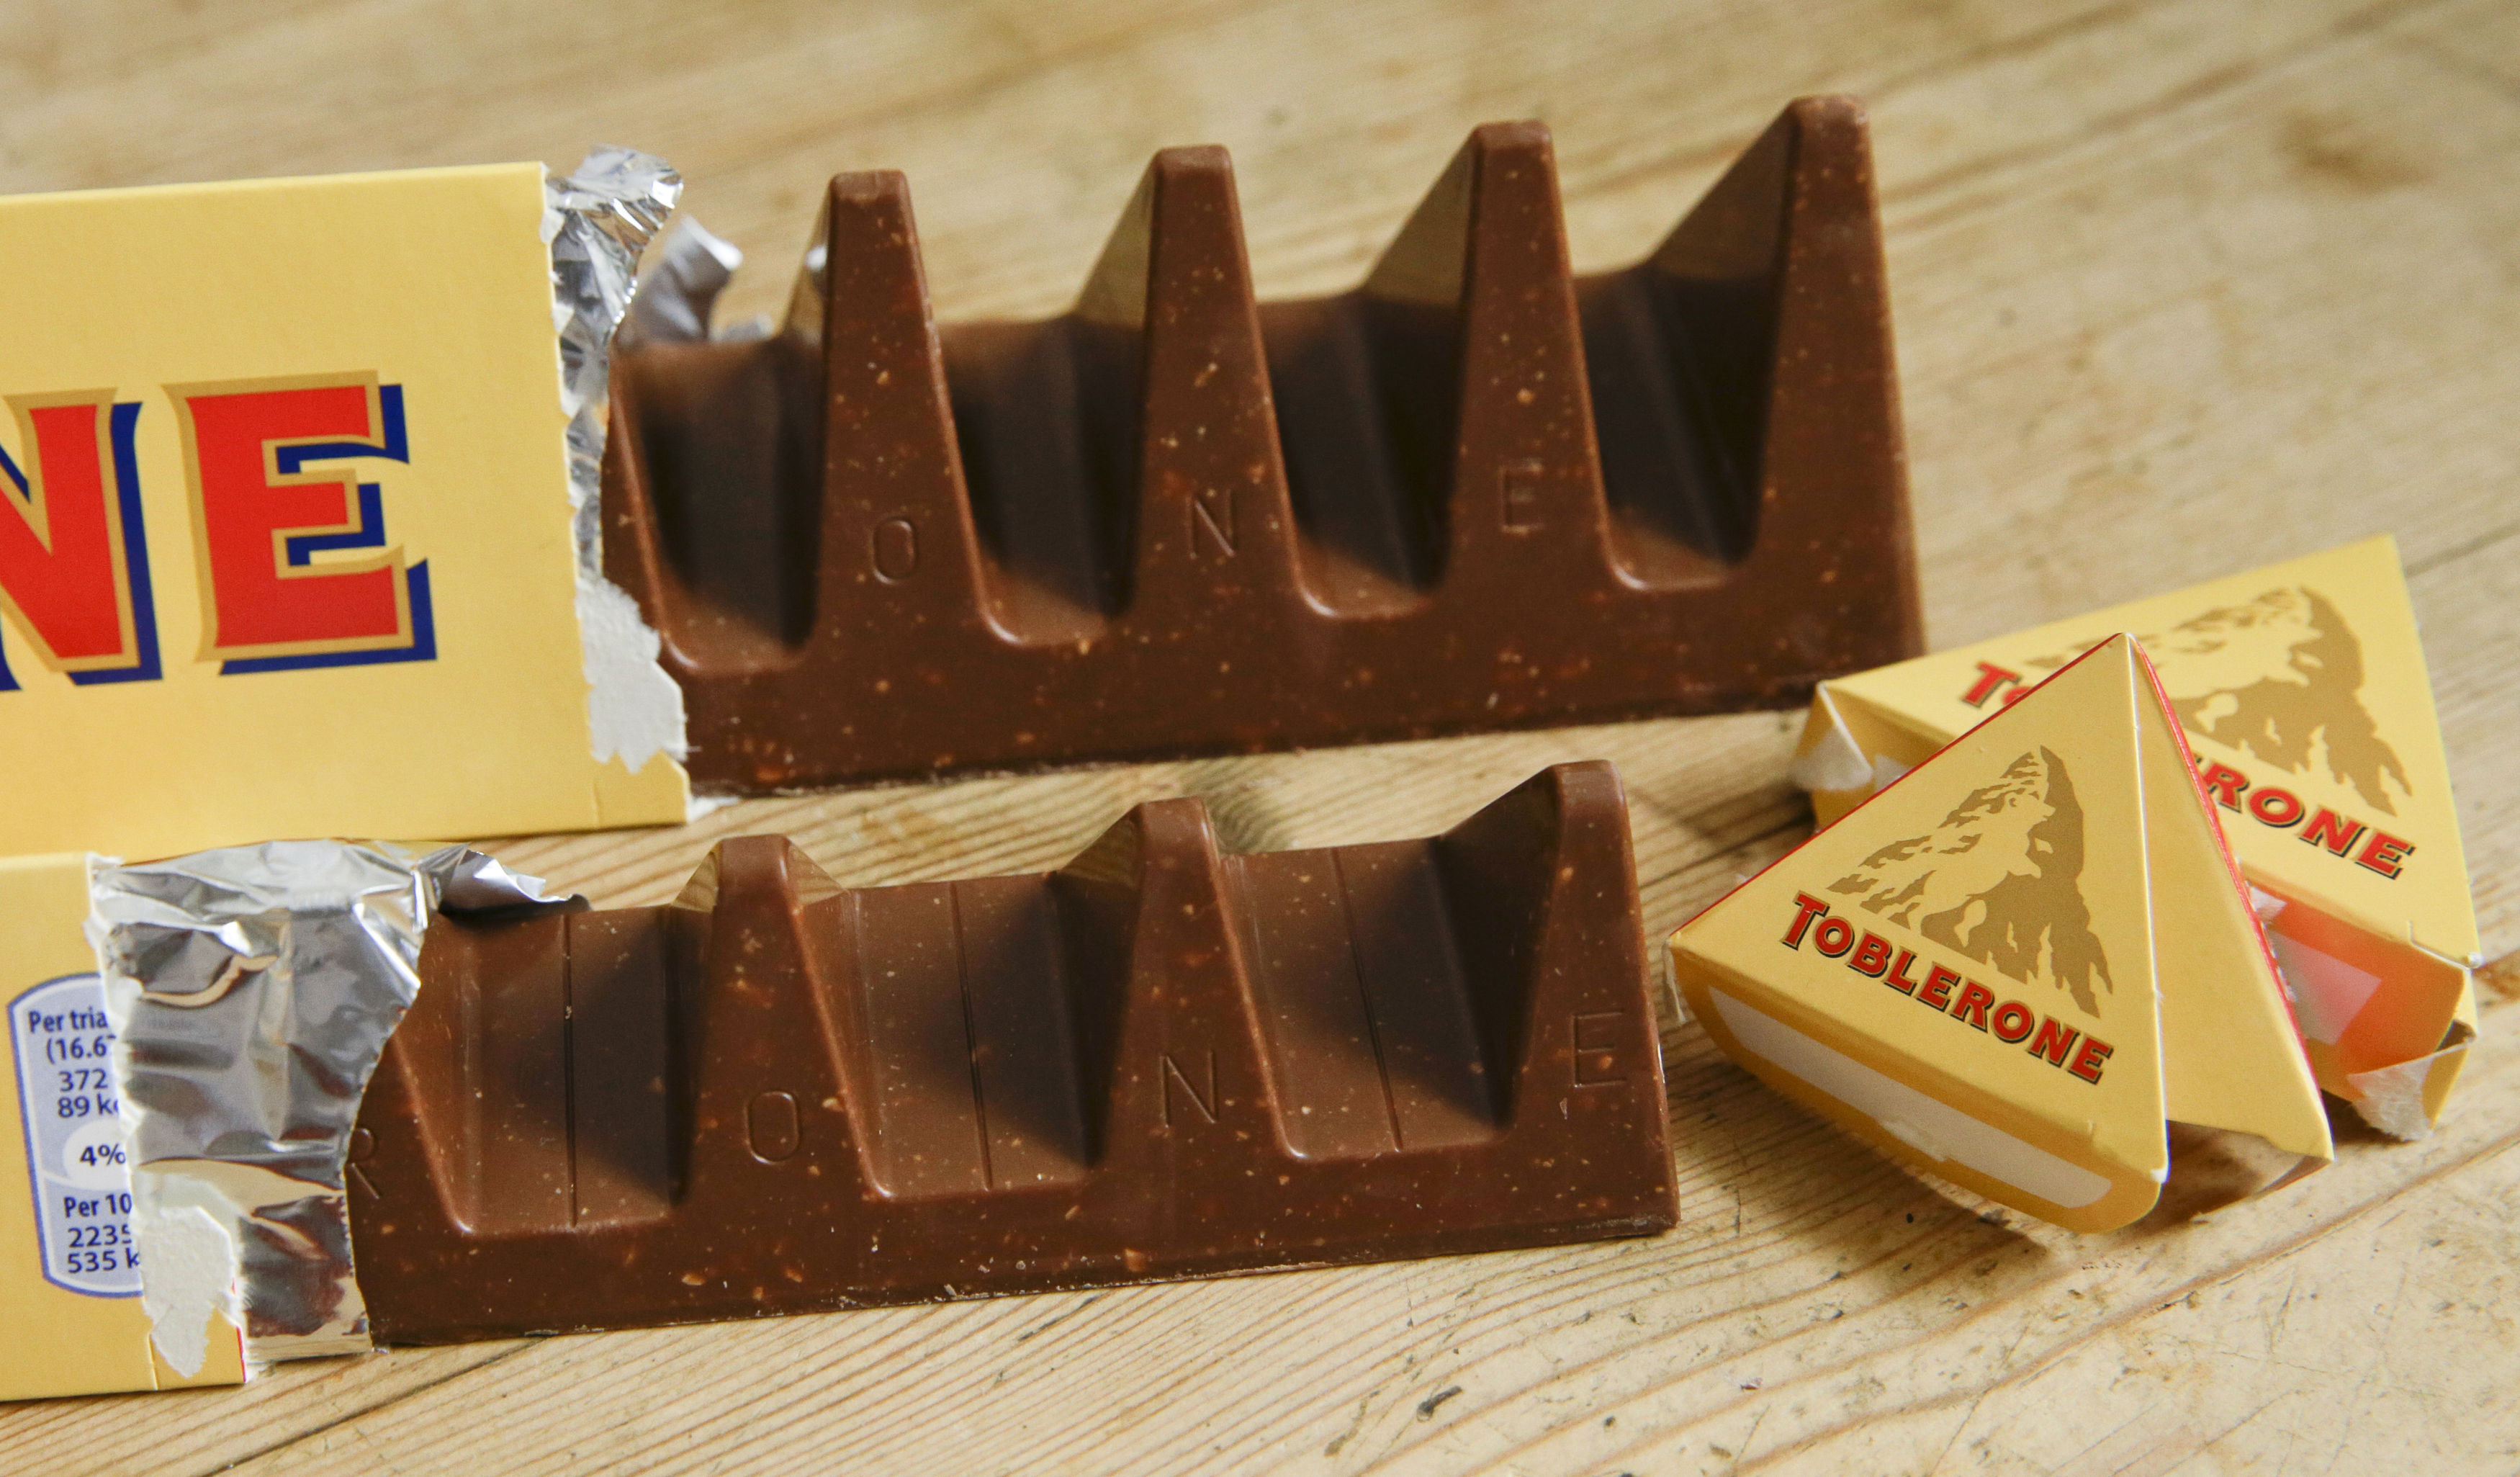 The new style of Toblerone (front) and the old (background)